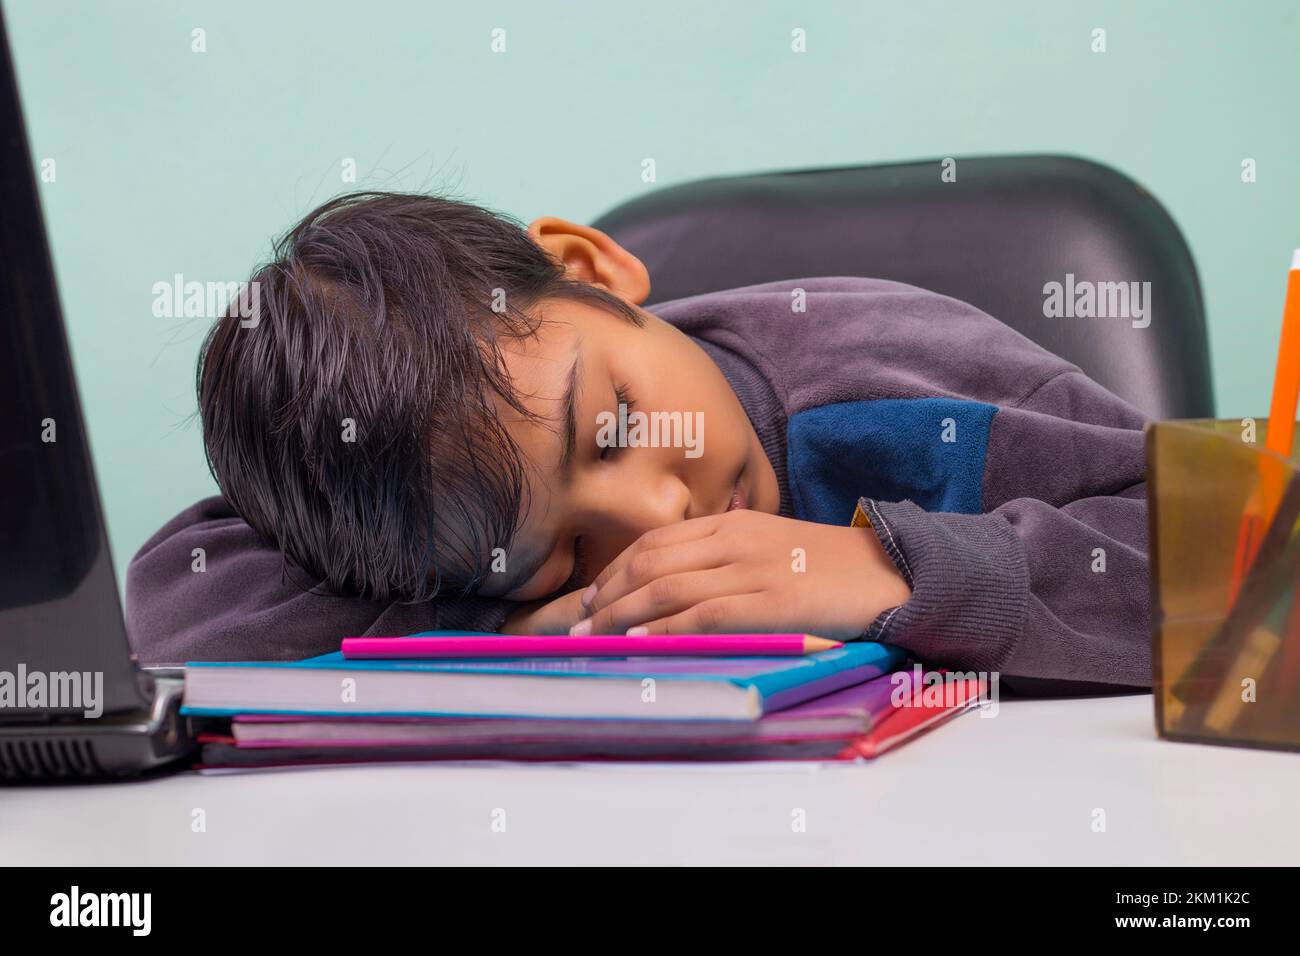 a boy laying down on table and Sleeping Stock Photo